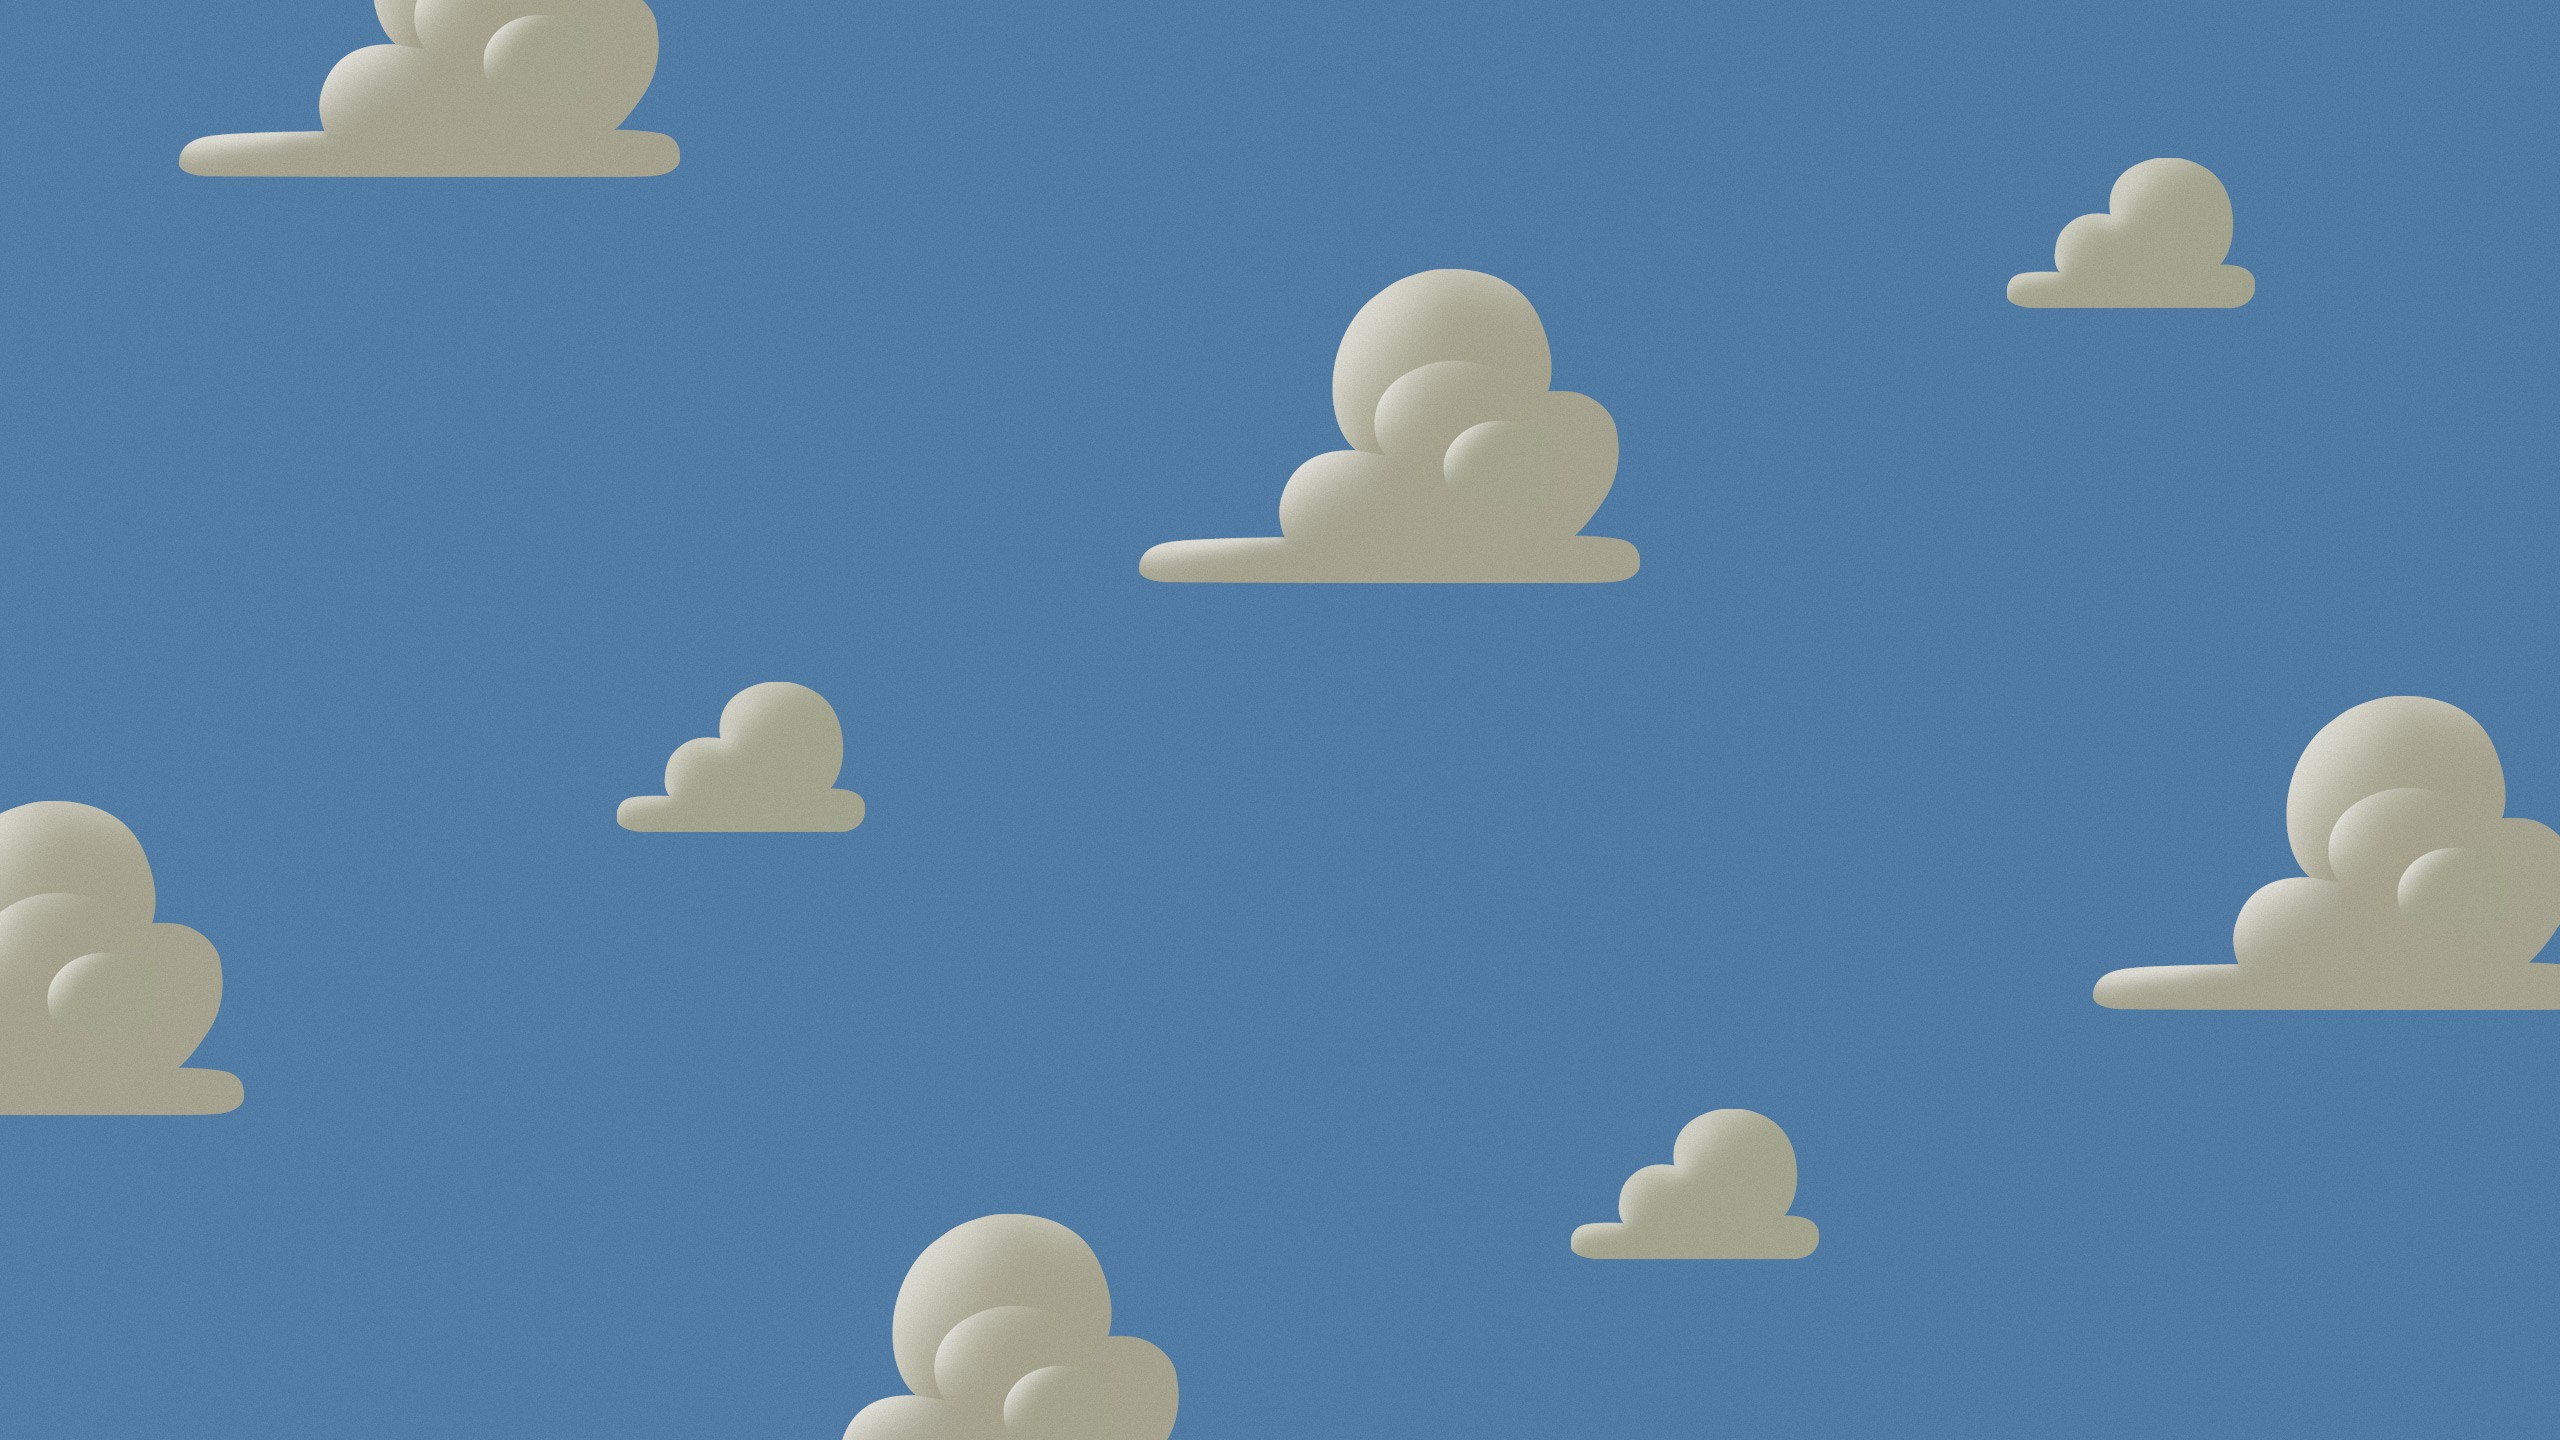 General 2560x1440 Toy Story animated movies movies clouds sky digital art simple background